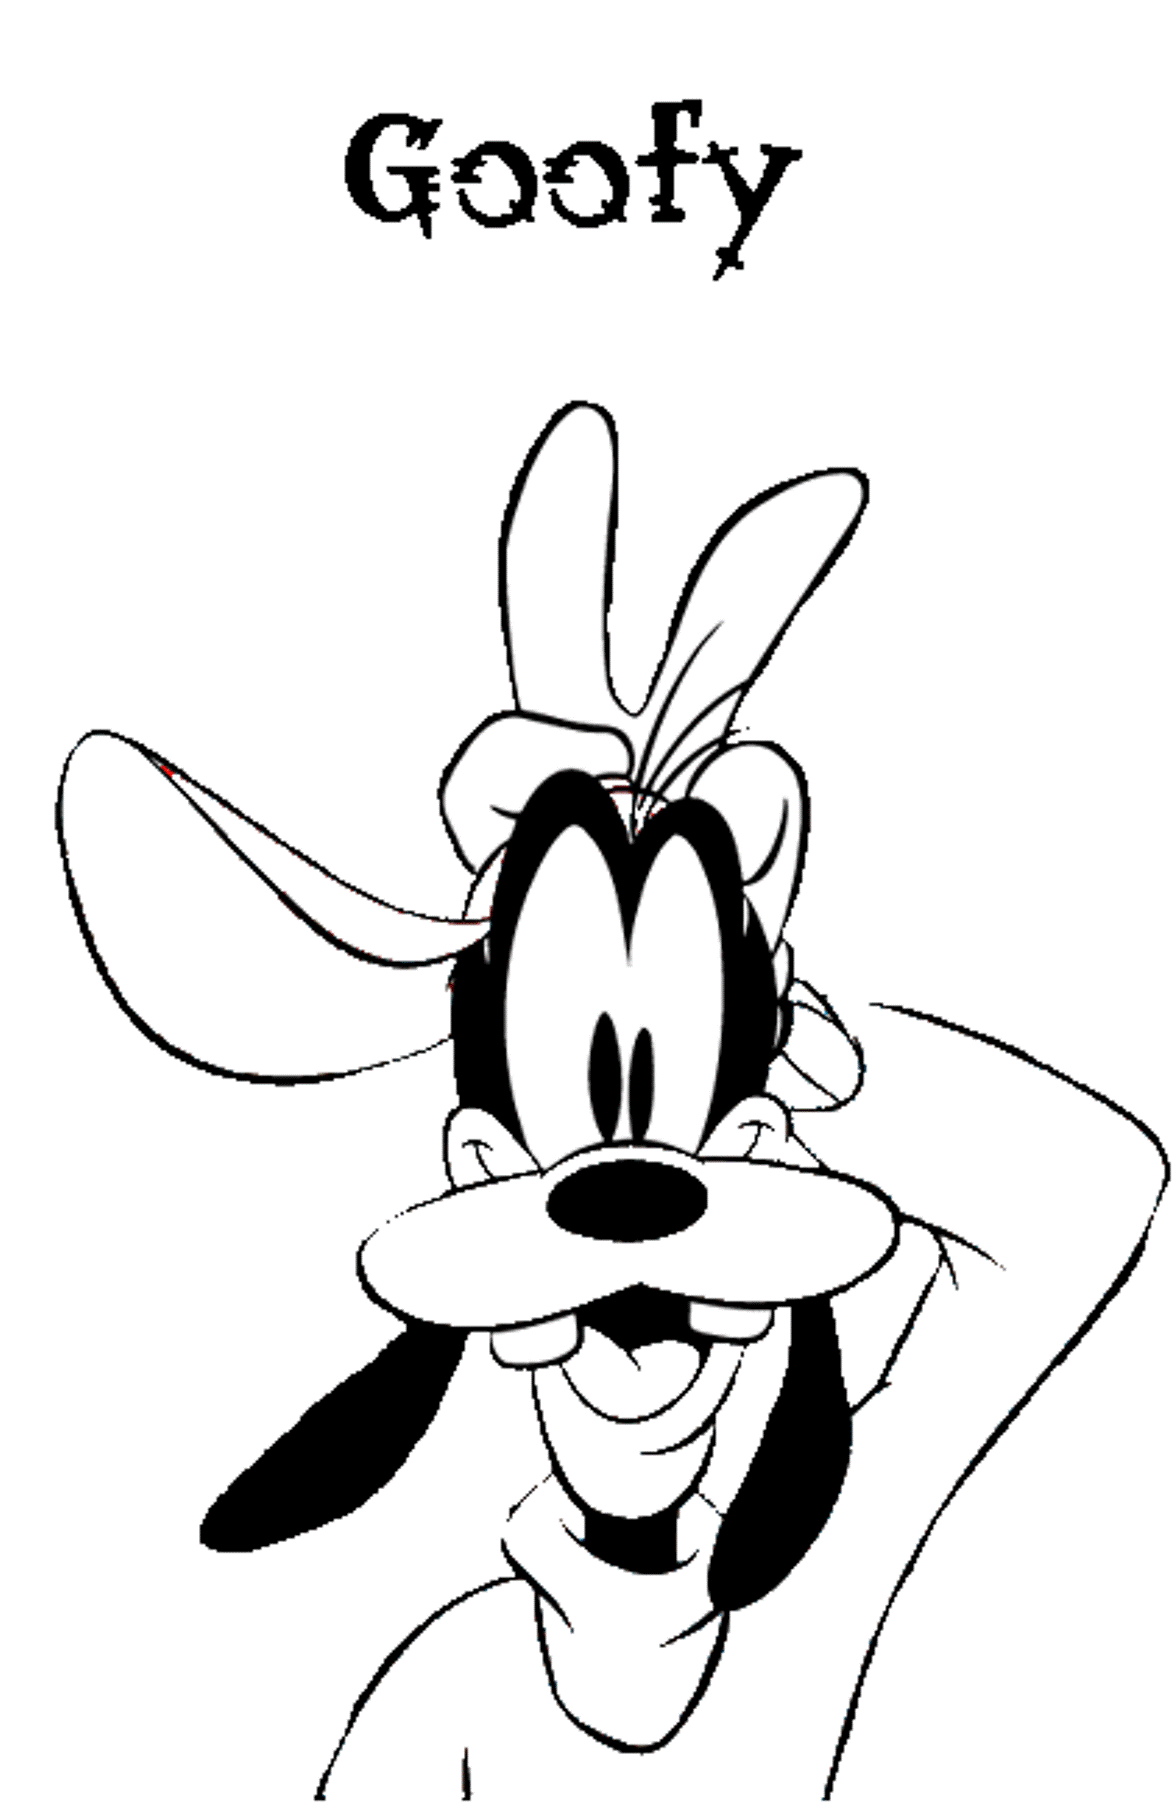 Goofy Cartoon Coloring Pages